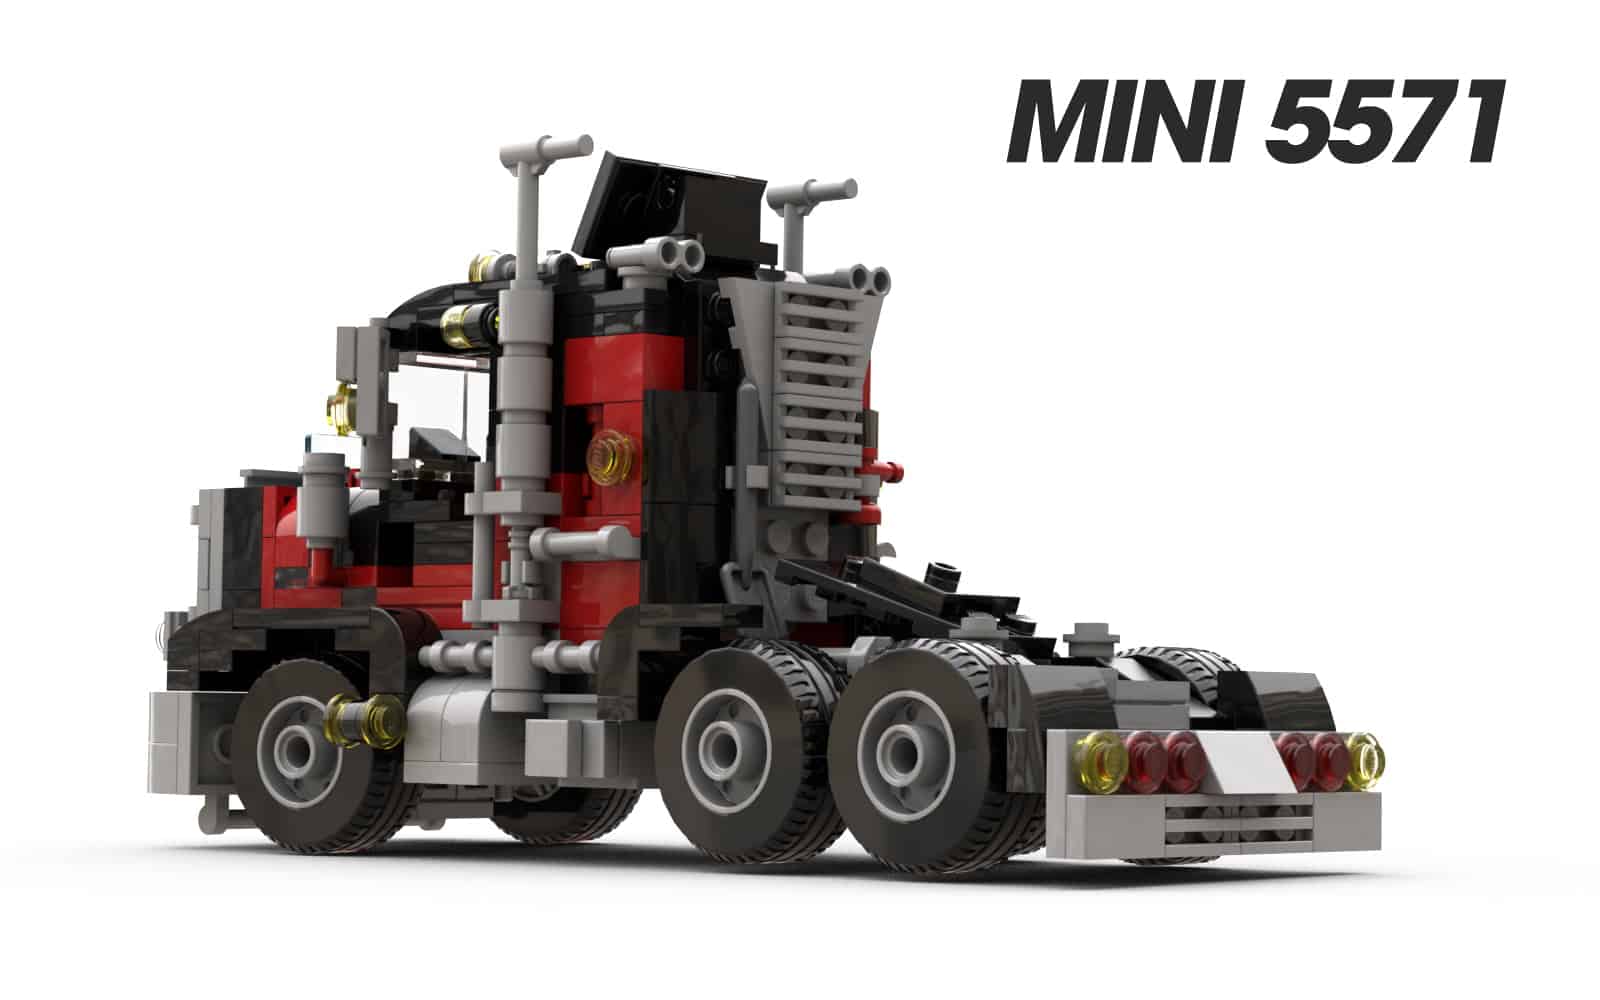 MOC] Simson S51 - LEGO Technic, Mindstorms, Model Team and Scale Modeling -  Eurobricks Forums